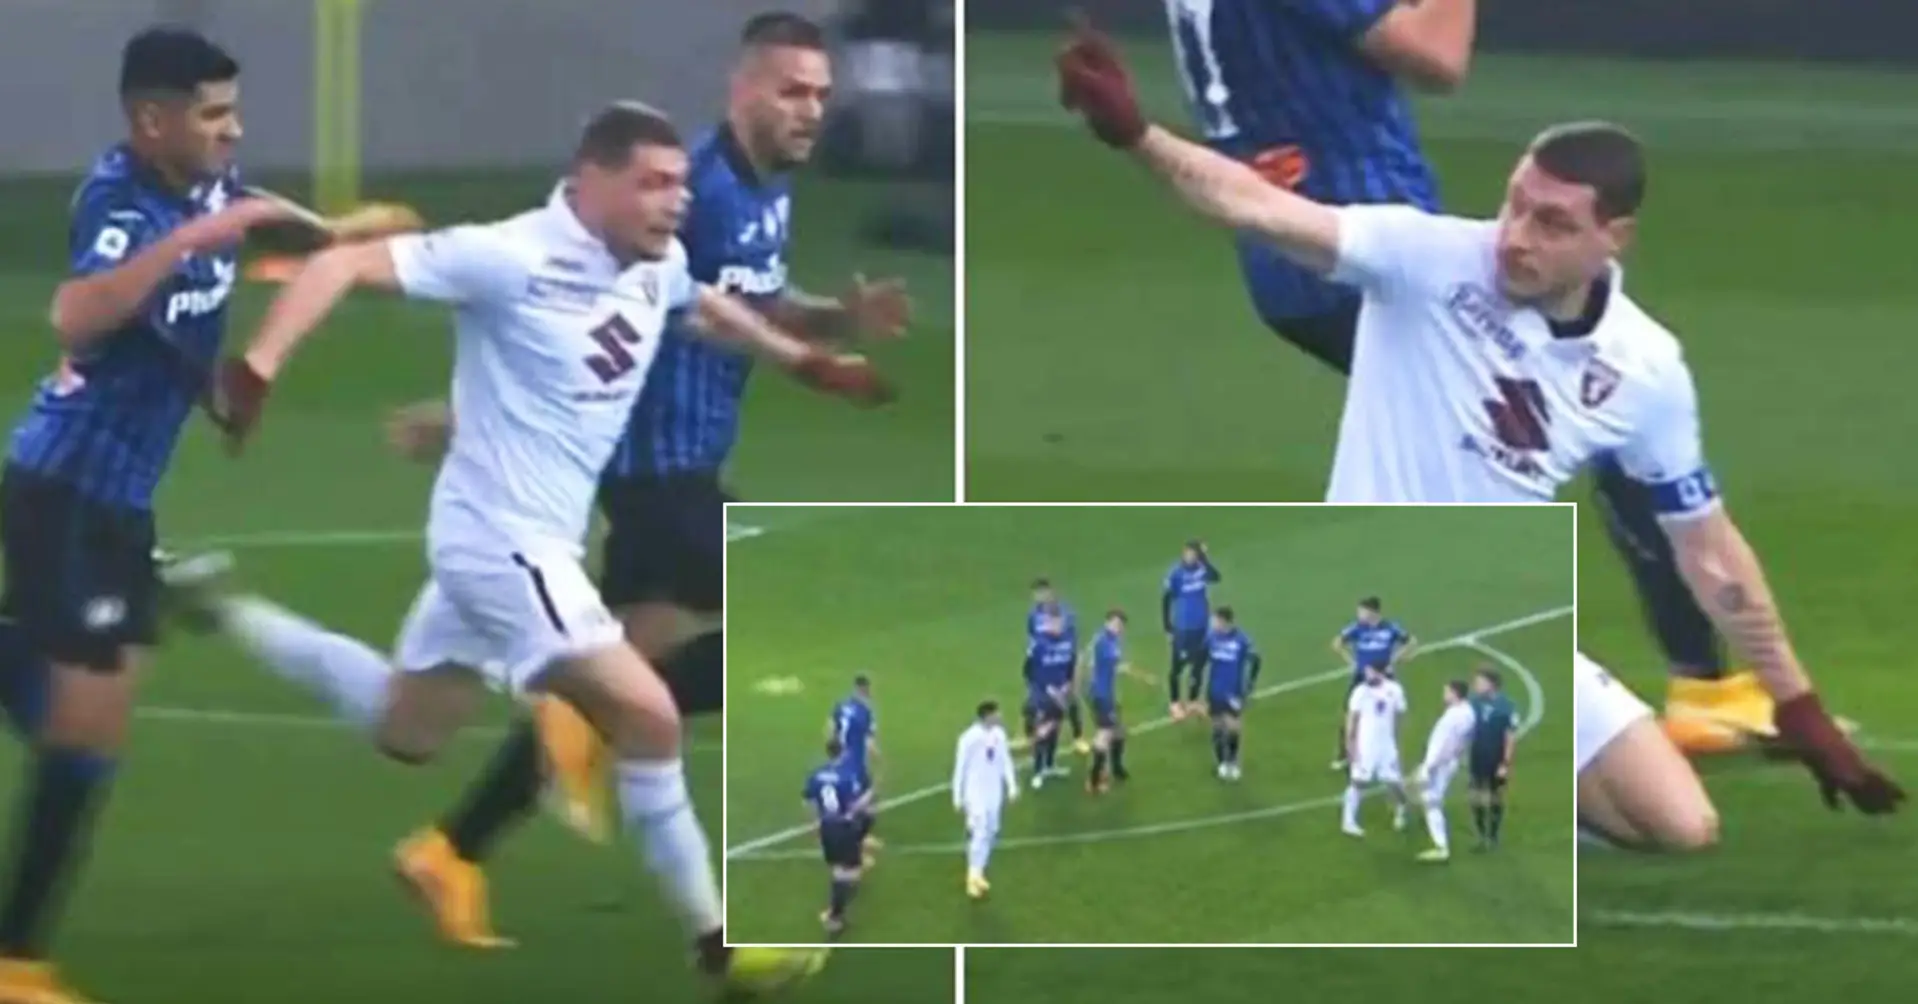 Serie A star Belotti asks referee NOT to book his opponent, then refuses to take free kick